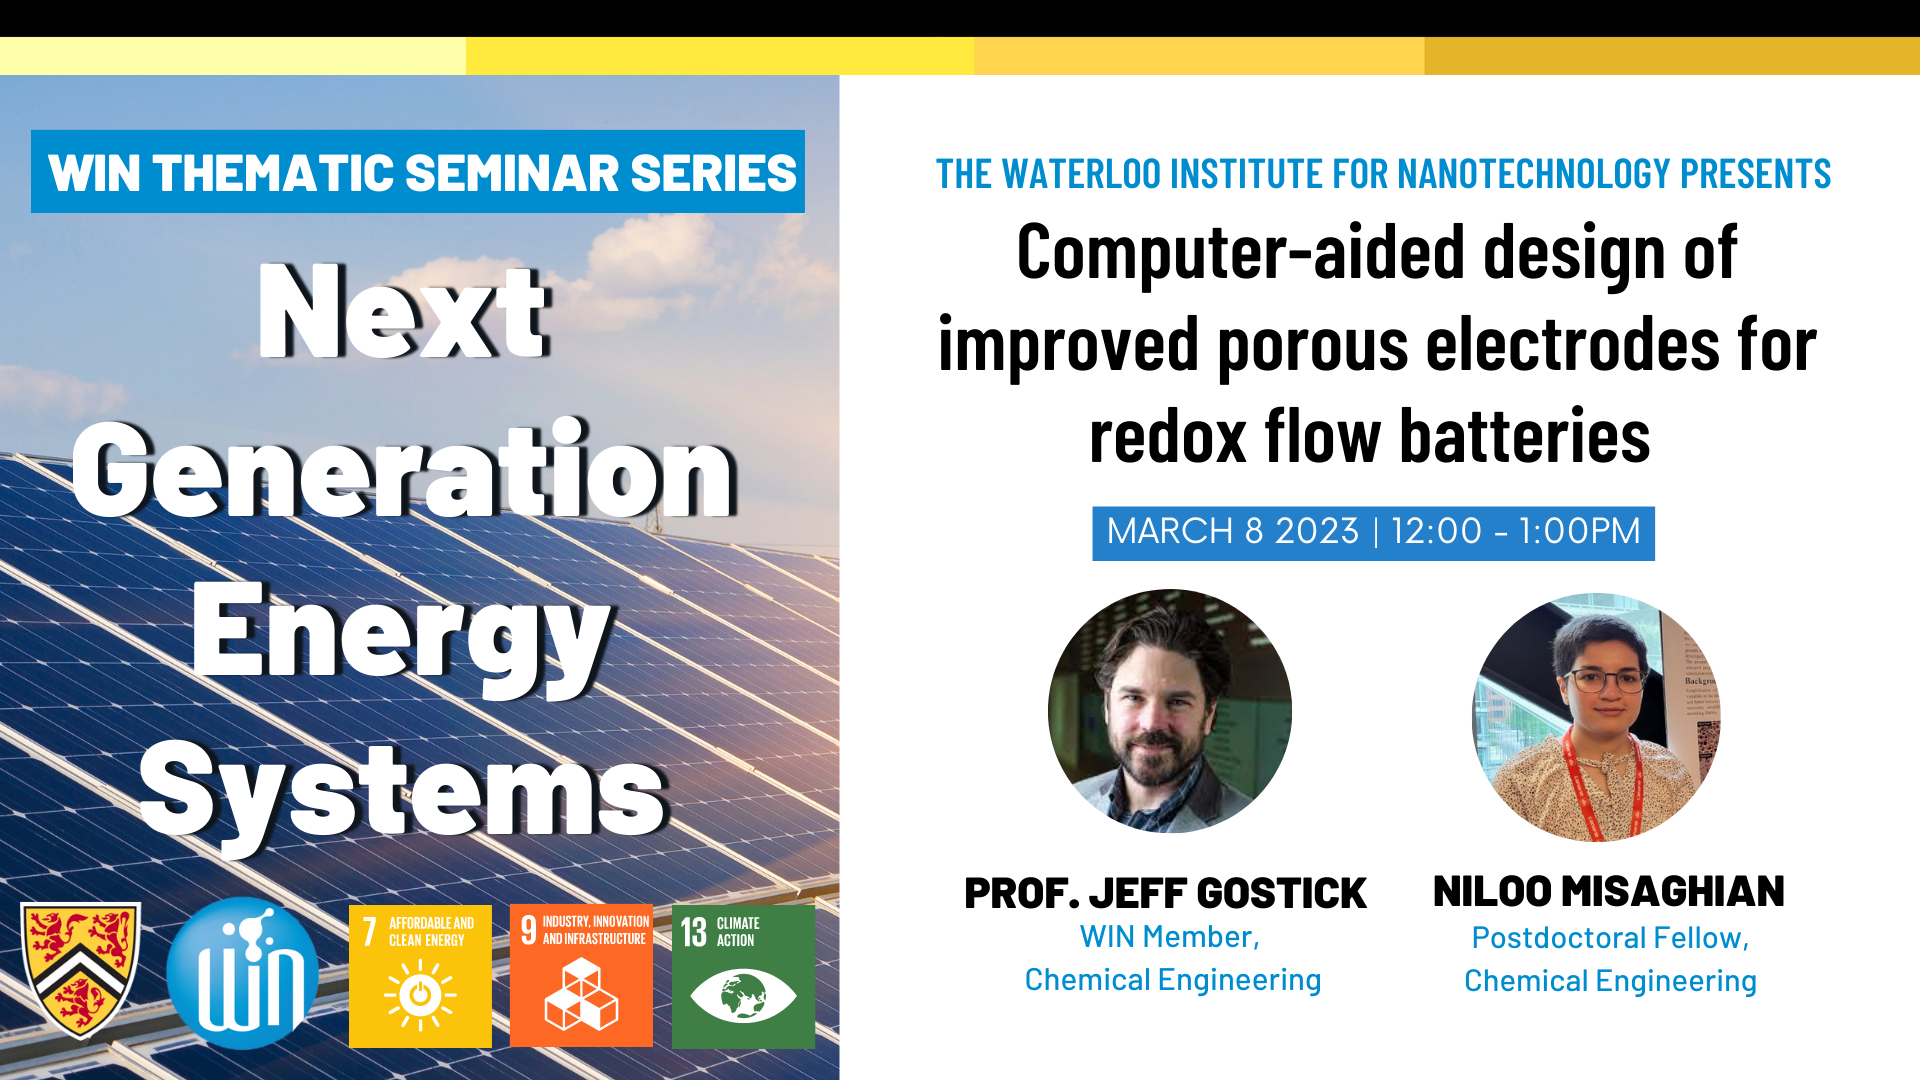 WIN Thematic Seminar, Next Generation Energy Systems theme with Prof Jeff Gostick and Niloo Misaghian